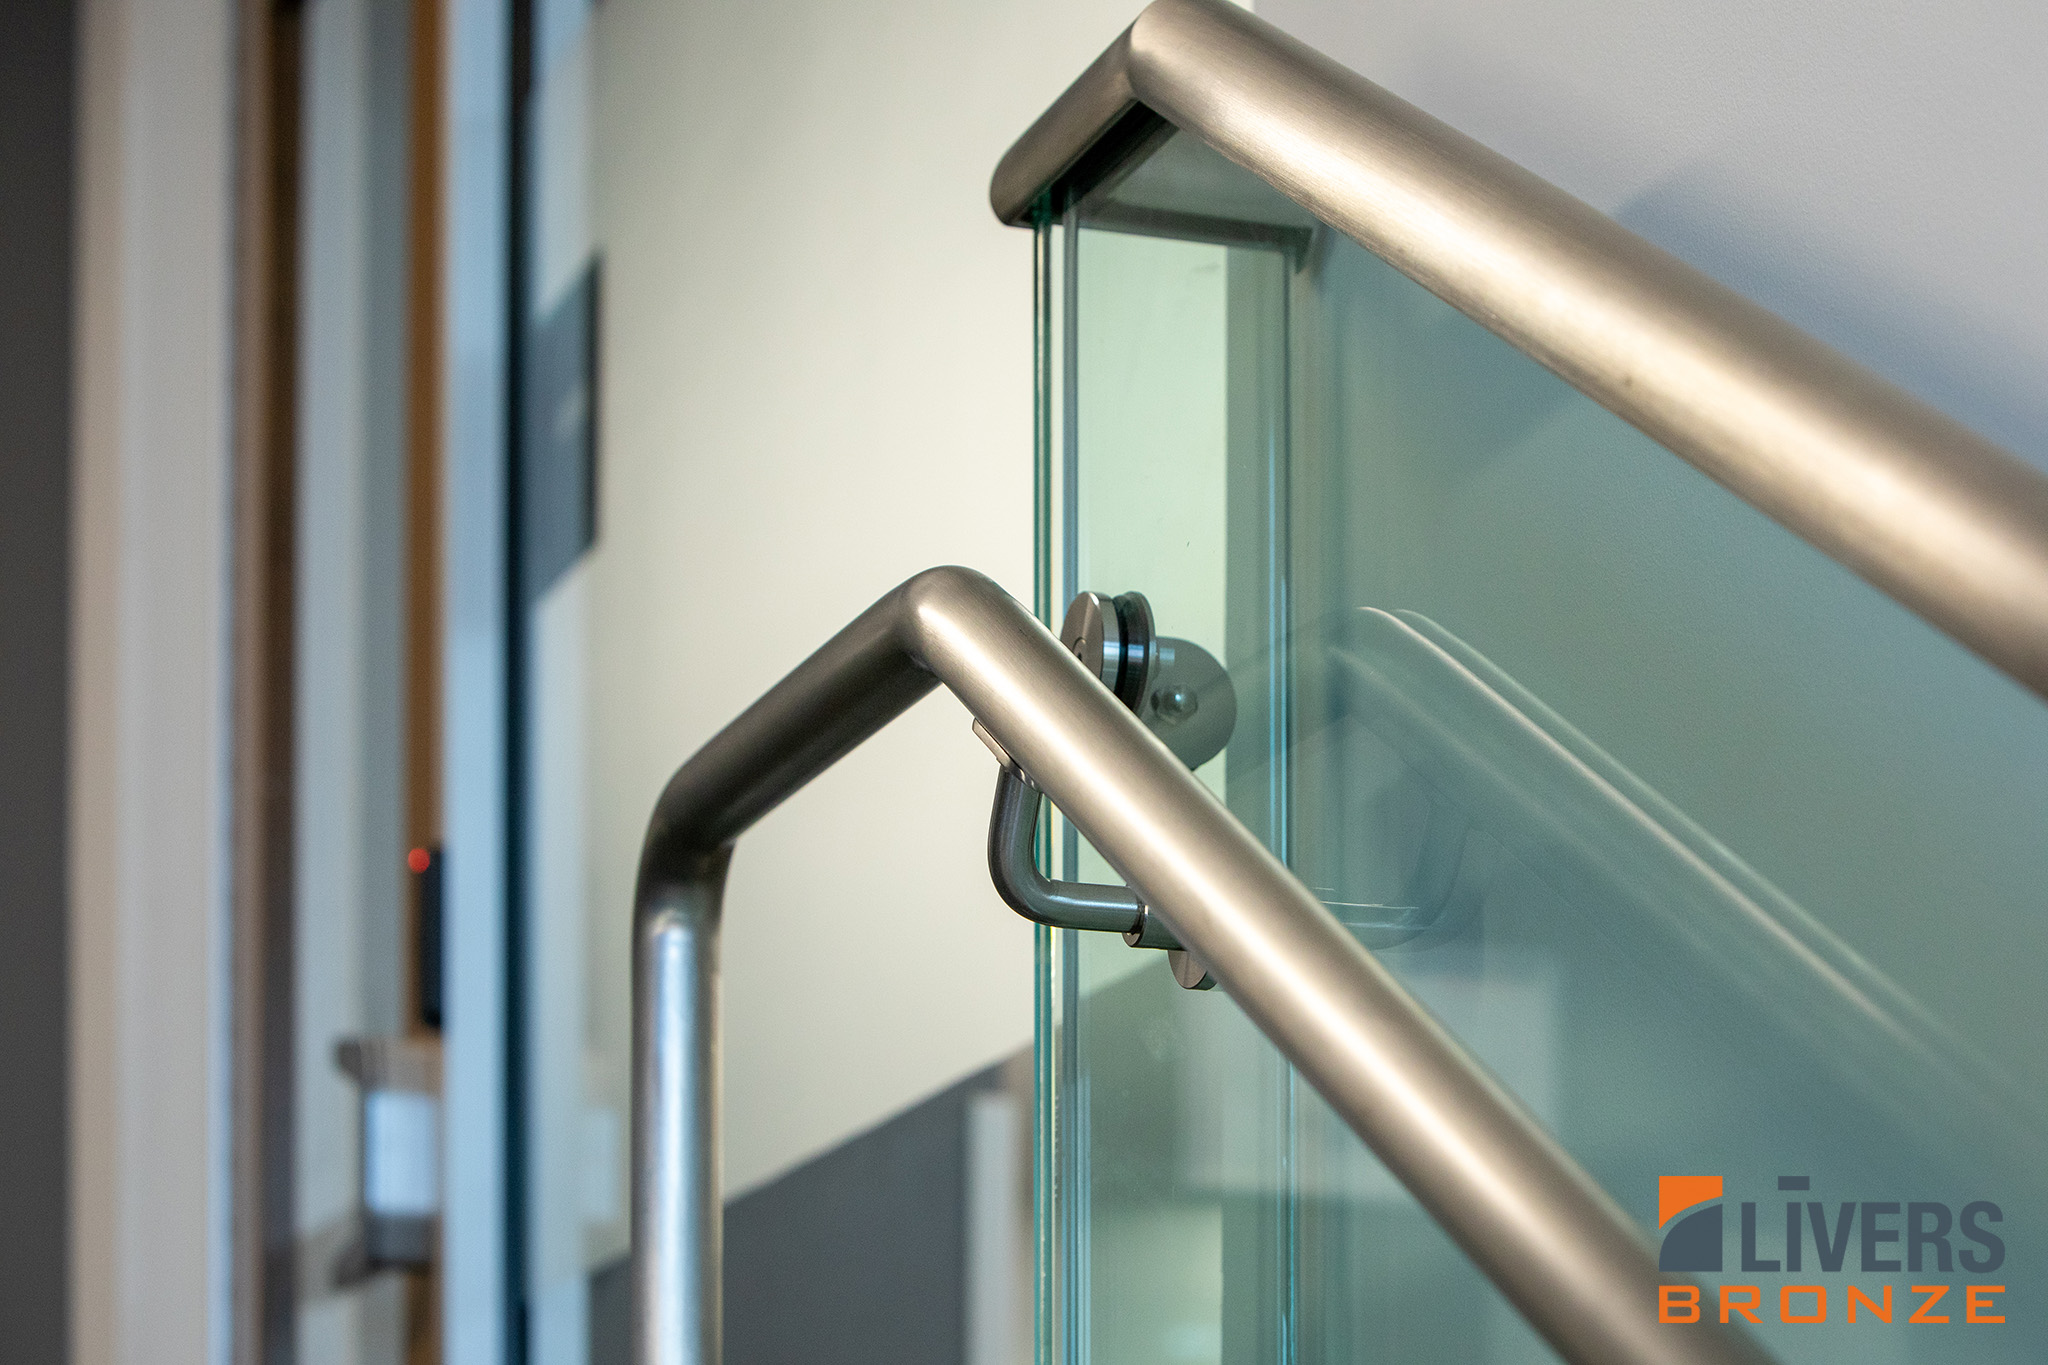 Livers Bronze Struct-U-Rail Commercial Glass Railing installed in San Antonio Independent School District Central Office Building is Made in the USA